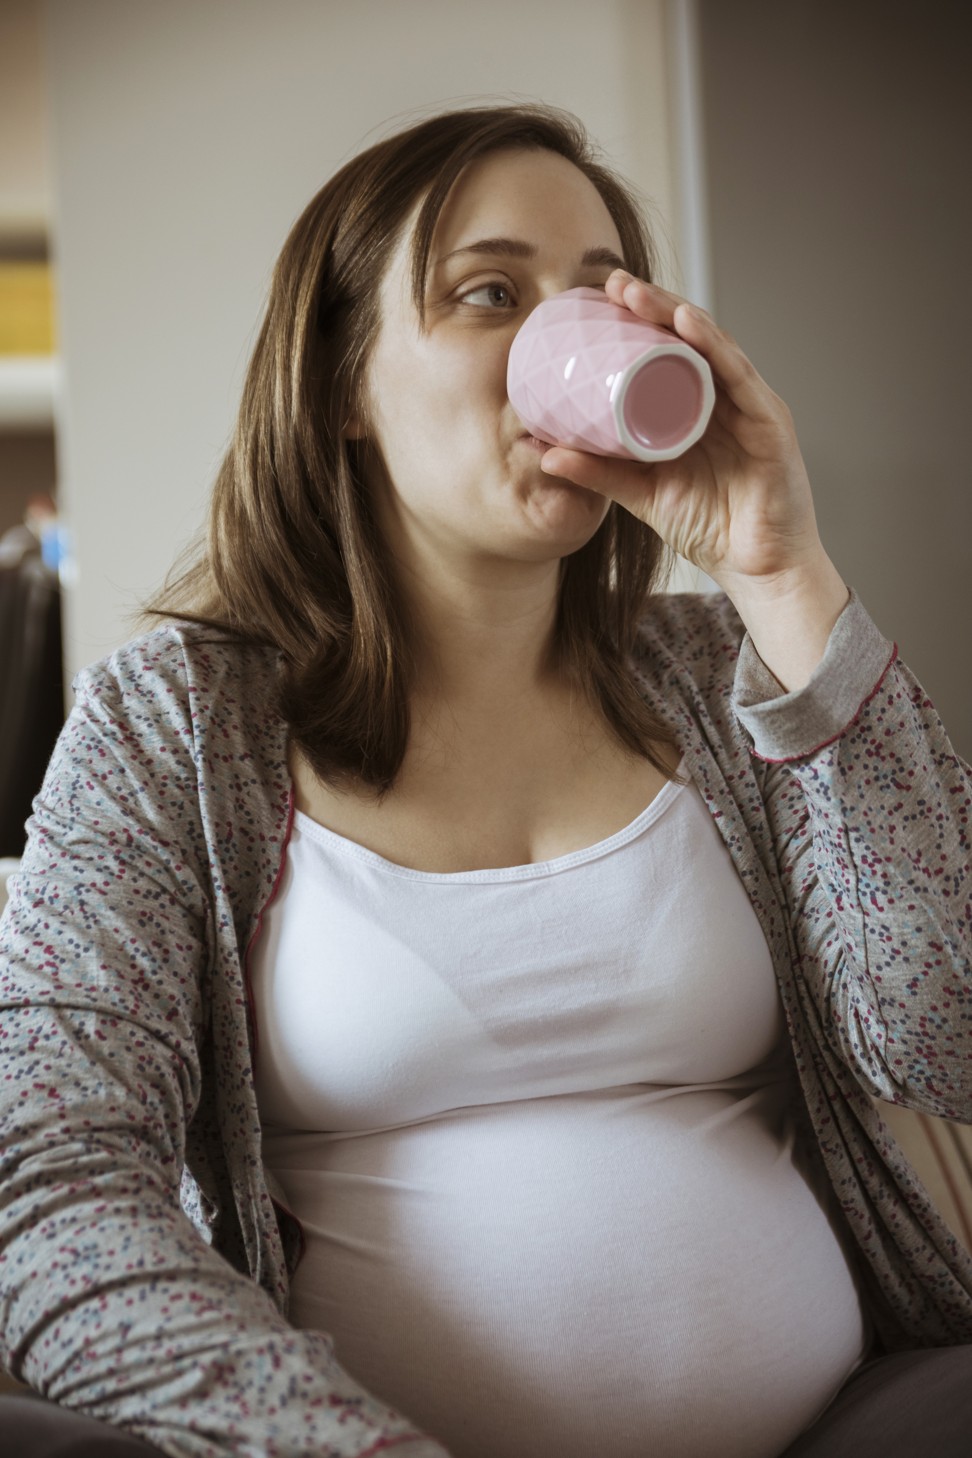 While you can still drink coffee during pregnancy, you should keep your caffeine intake below 300mg (around three regular cups). Photo: Shutterstock